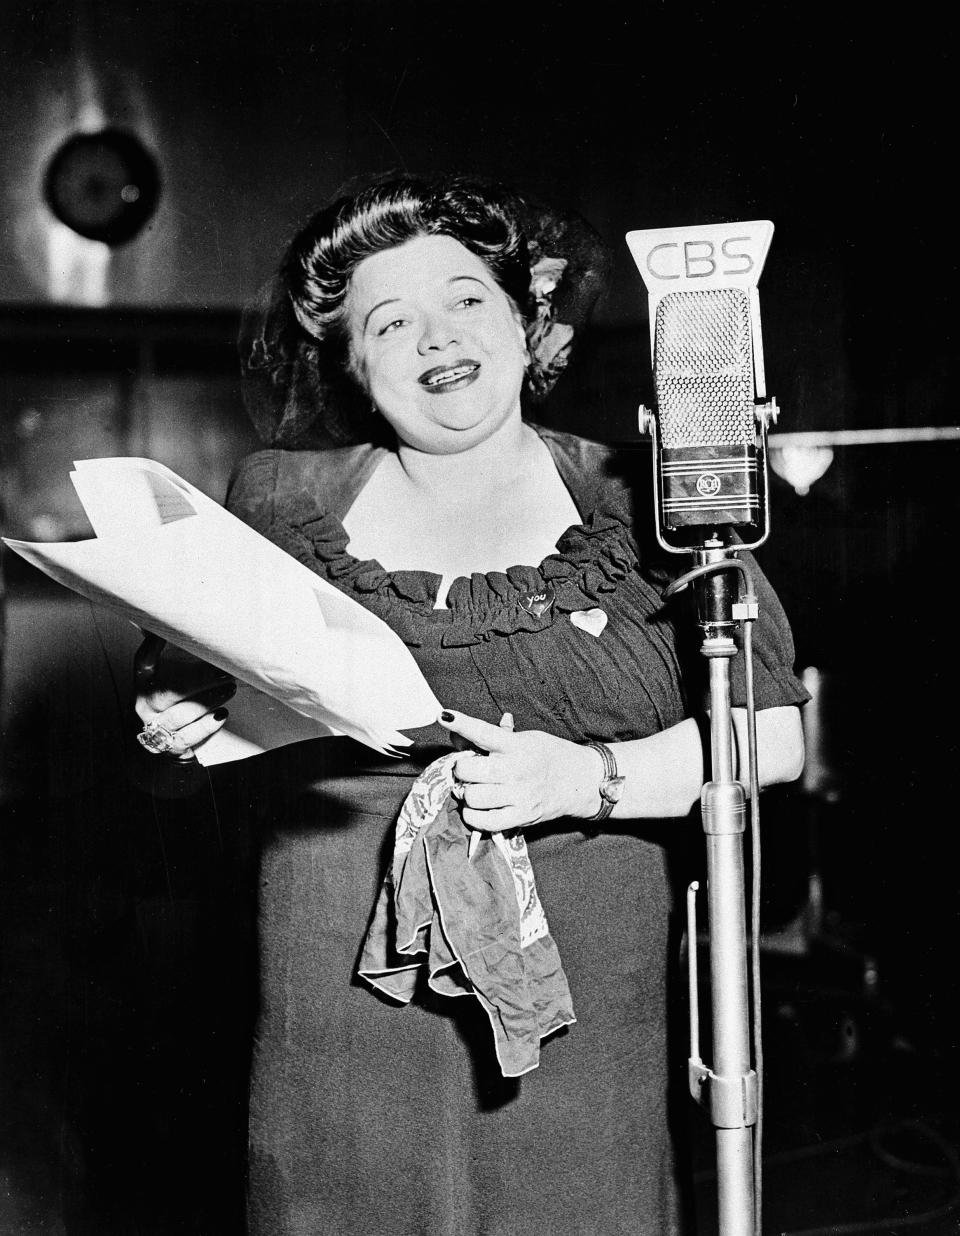 FILE - In this Jan. 1, 1944 file photo, Mildred Bailey, a jazz singer of the Coeur d'Alene American Indian tribe, performs on her musical radio program "Mildred Bailey and Company" in New York City. "RUMBLE: The Indians Who Rocked the World," a new PBS Independent Lens documentary set to air Monday, Jan 21, 2019, shows how Native Americans laid the foundations to rock, blues and jazz. (AP Photo, File)